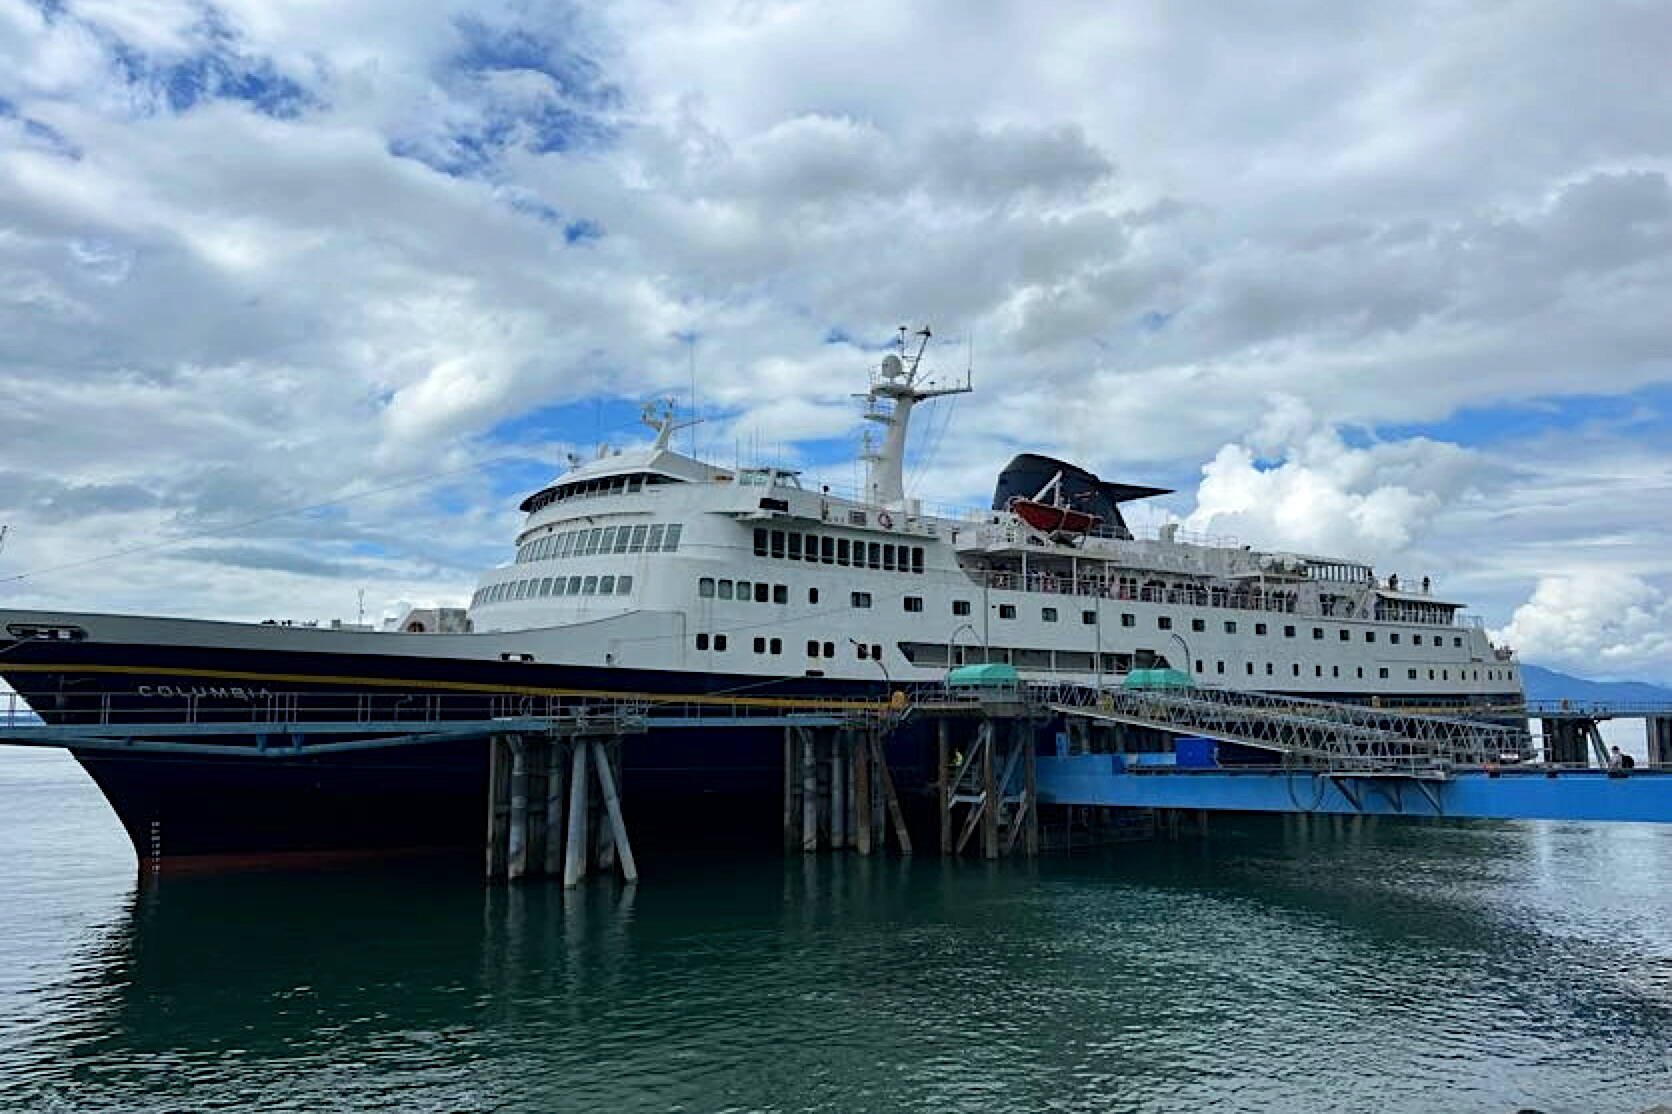 The Columbia ferry docks in Ketchikan earlier this month. Updates to the Alaska Marine Highway System are a major component of a draft statewide transportation improvement plan released Thursday. (Meredith Jordan / Juneau Empire).